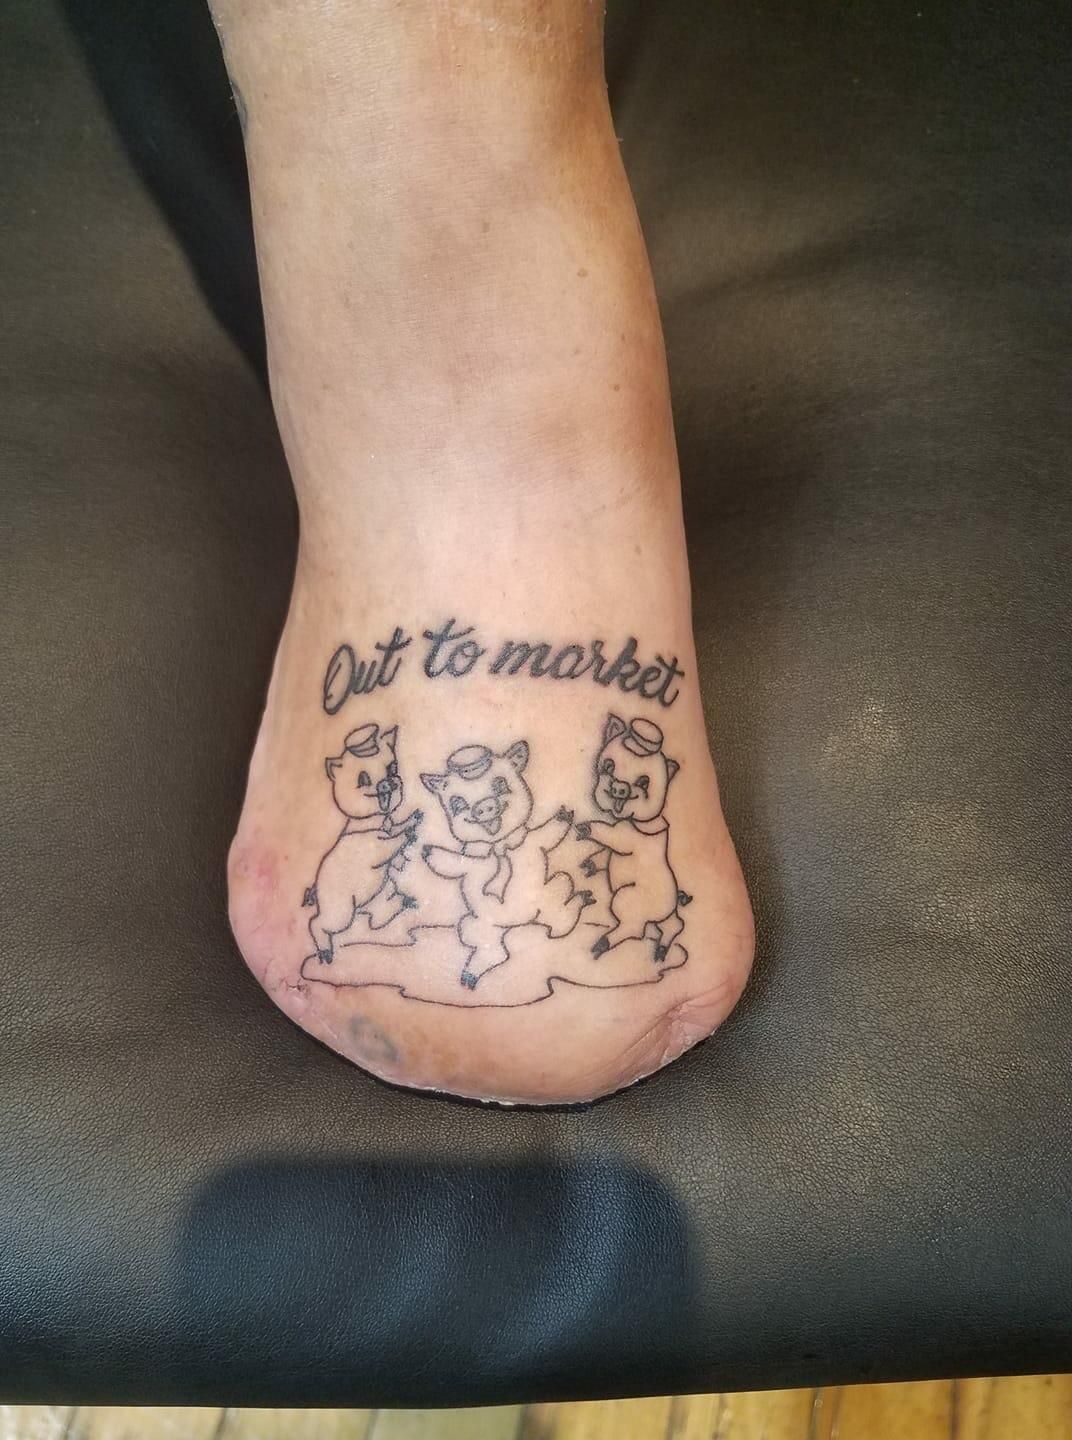 Friend had to get all of her toes removed. She commemorated the surgery with this tattoo.